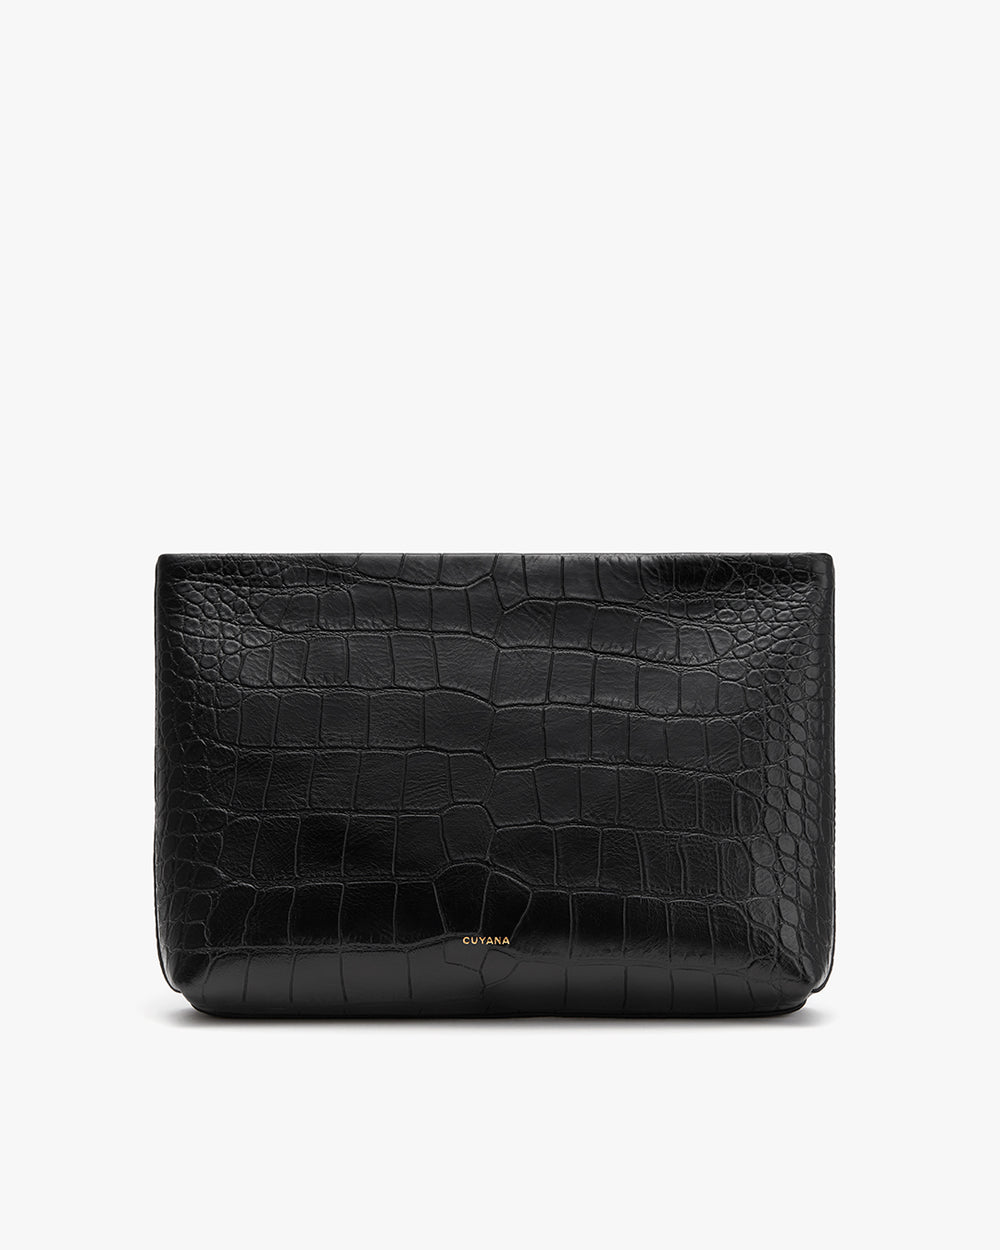 Croc-embossed leathered clutch purse on a plain background.